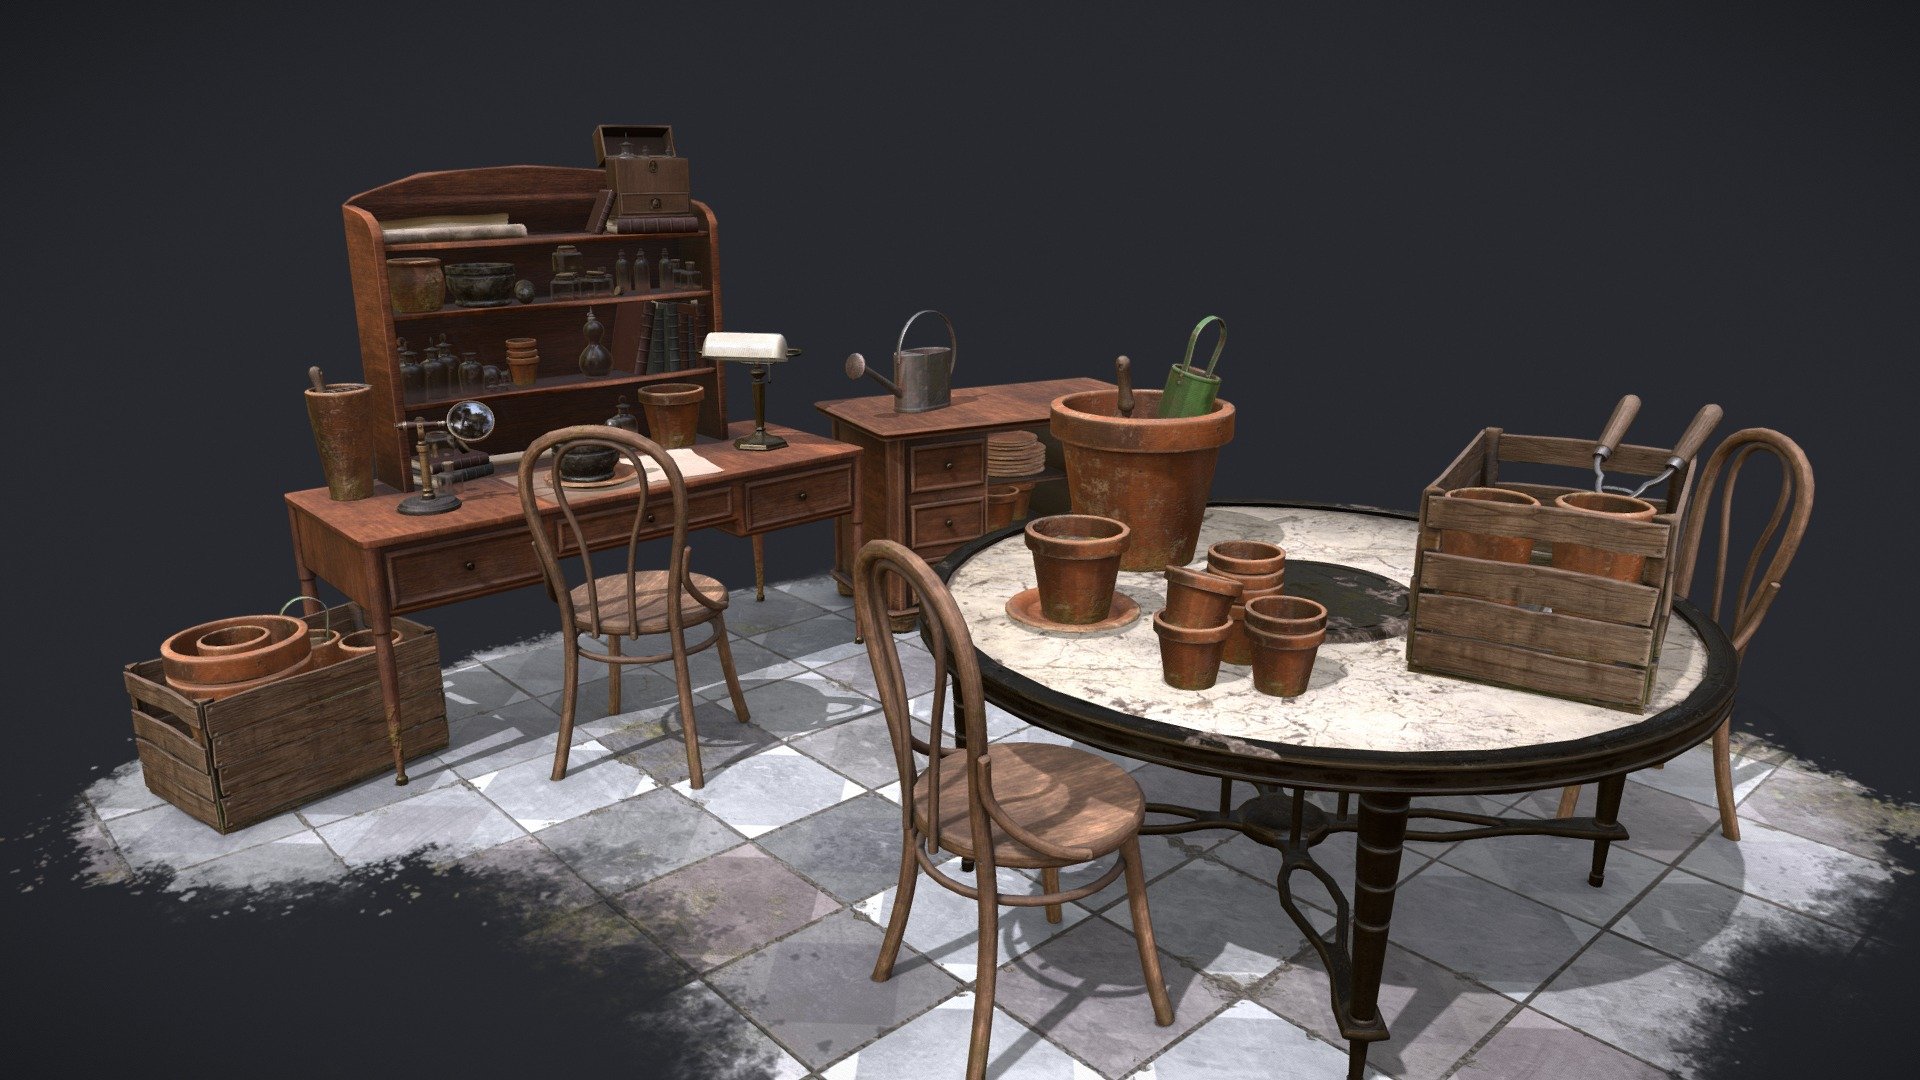 Here's an apothecary desk scene with many props, with high poly baked and textures made in Substance Painter. There's a lots of duplicated item but I wanted to build a little scene without to many various objects. There's also problems with transparency due to Skecthfab's limitations 3d model